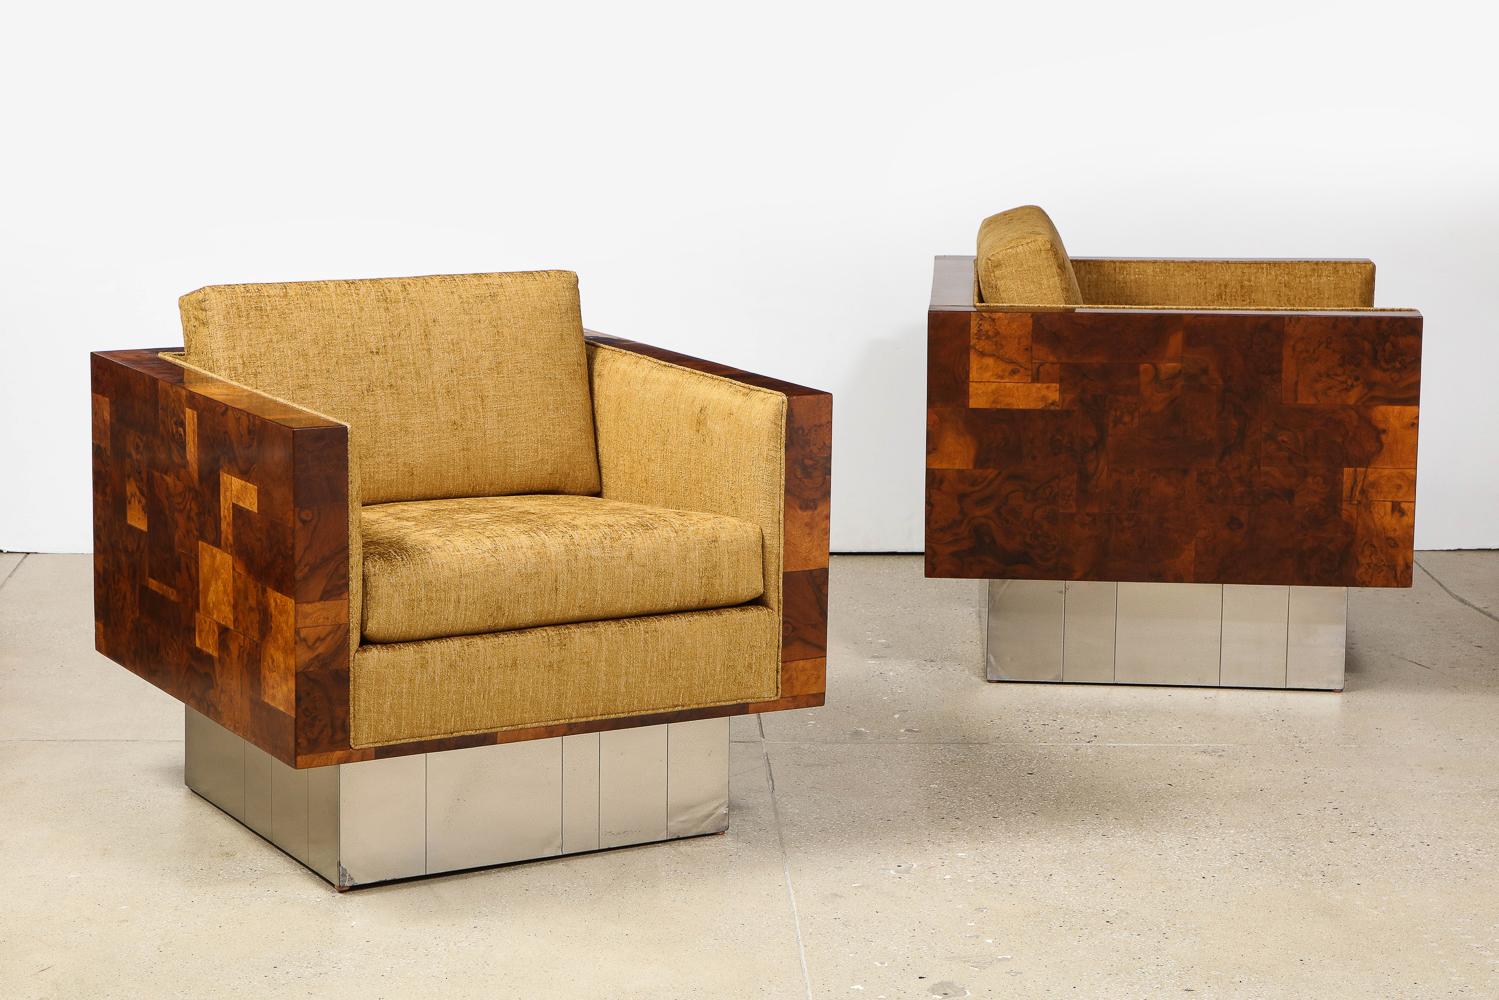 Burled wood, stainless steel, fabric, painted wood. A beautiful pair of Cityscape lounge chairs with a great swivel mechanism. Patch-work wood structure and velvet upholstery. Wood has been recently refinished, and cushions have been reupholstered.